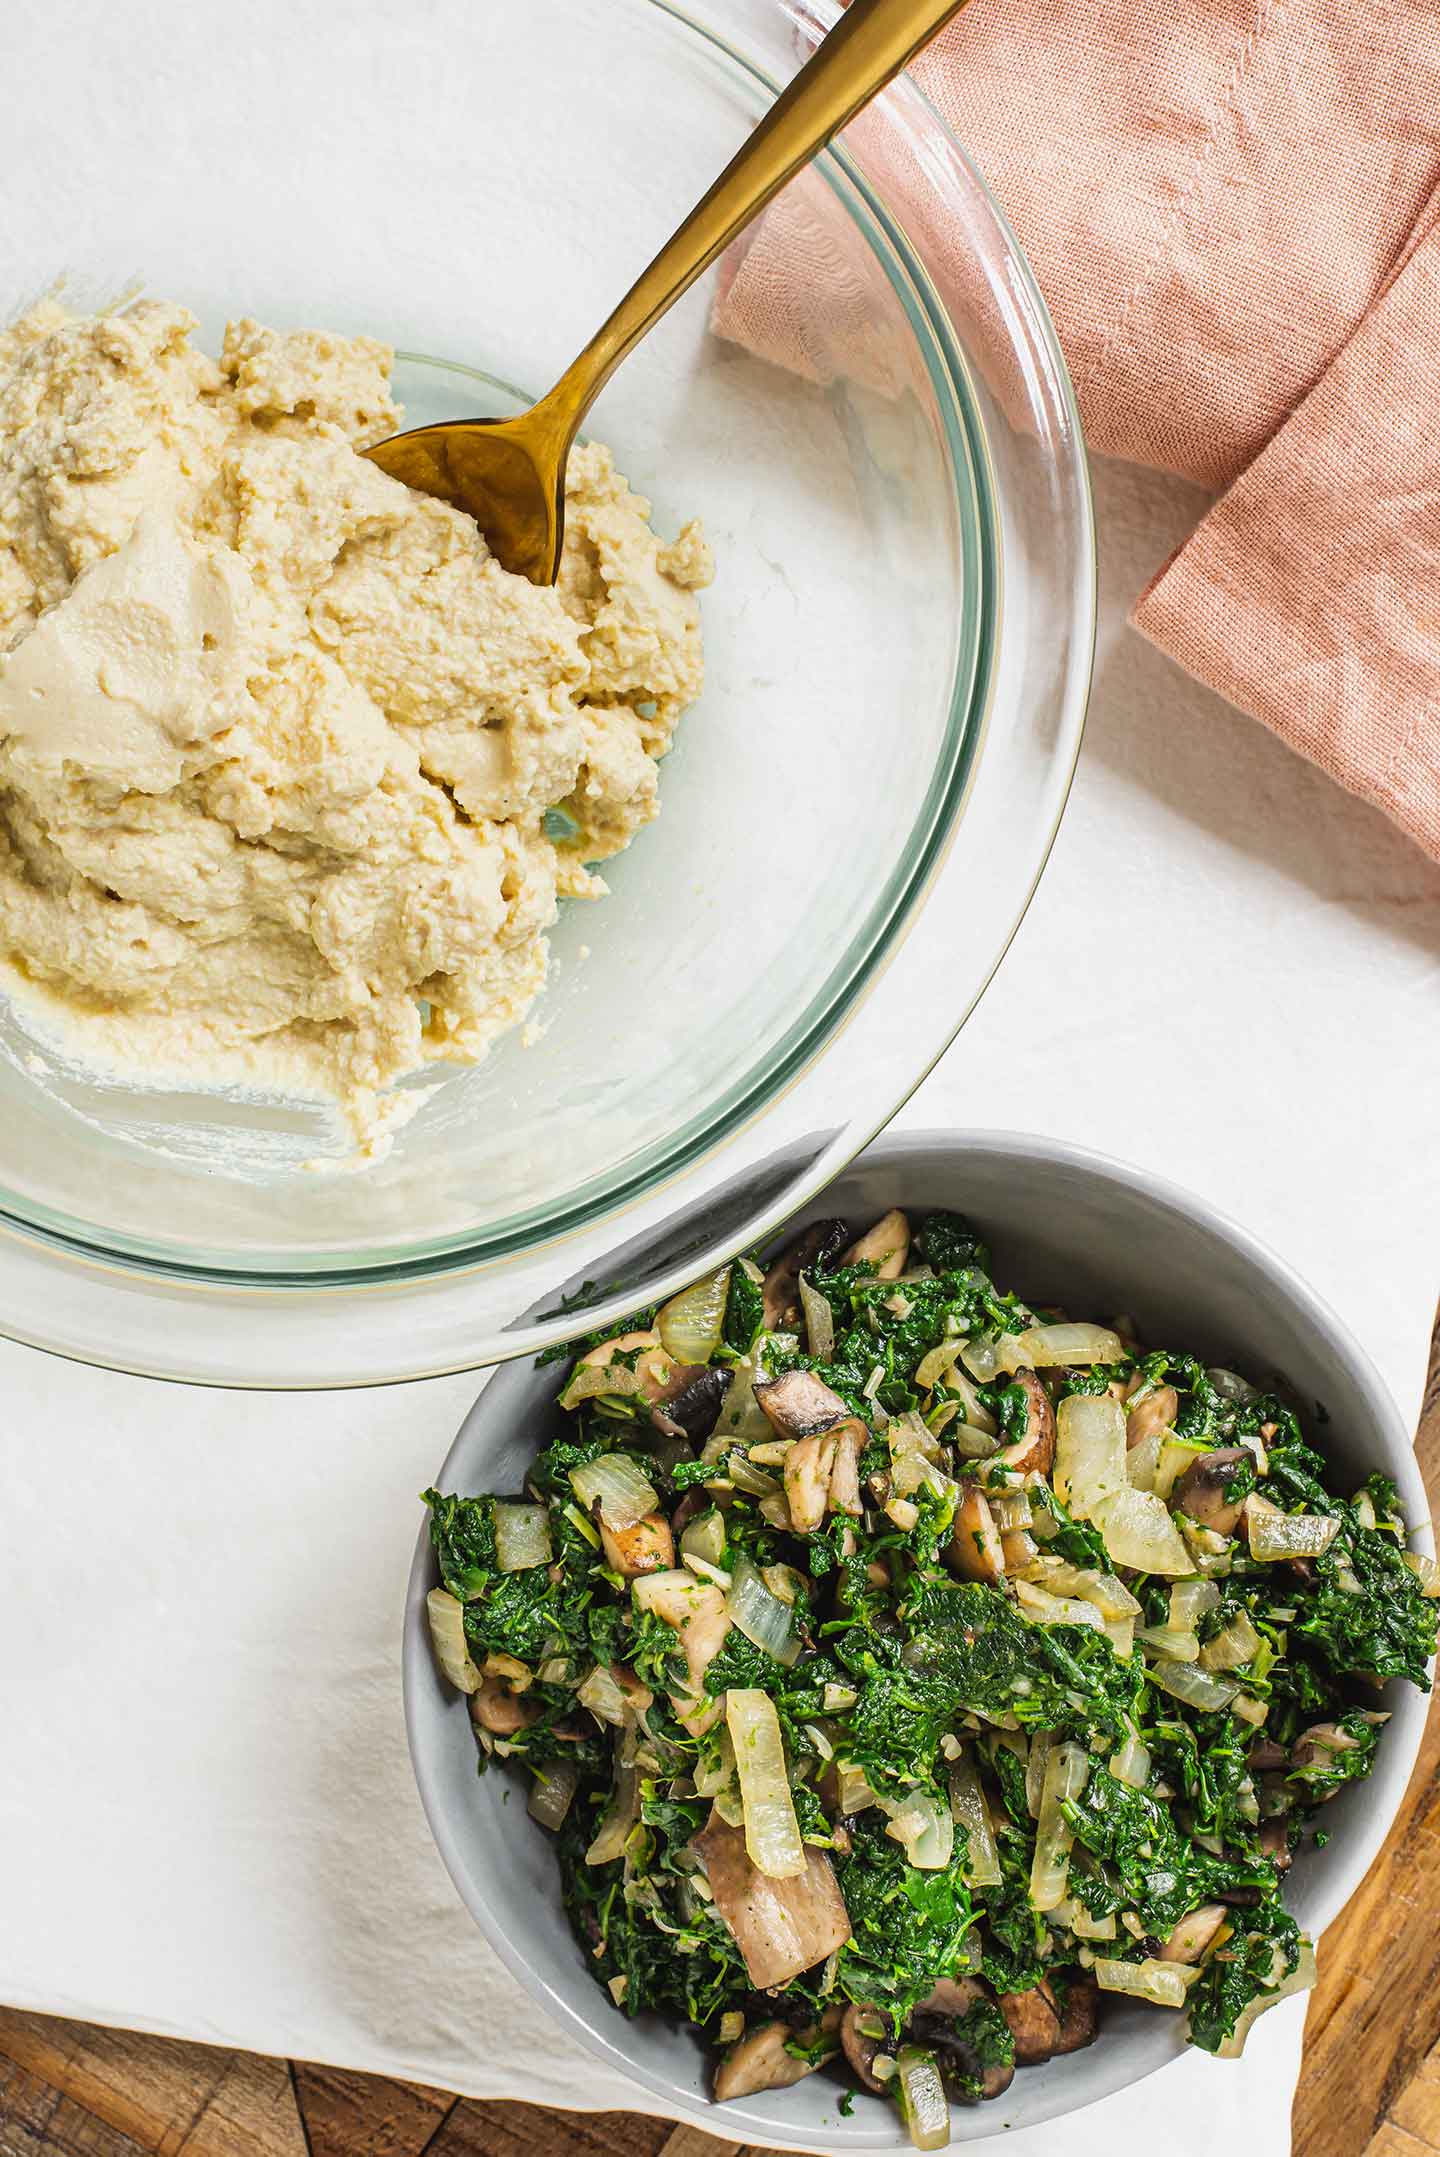 Top down view of the cooked spinach and mushroom mixture beside a bowl of creamy and textured tofu ricotta.